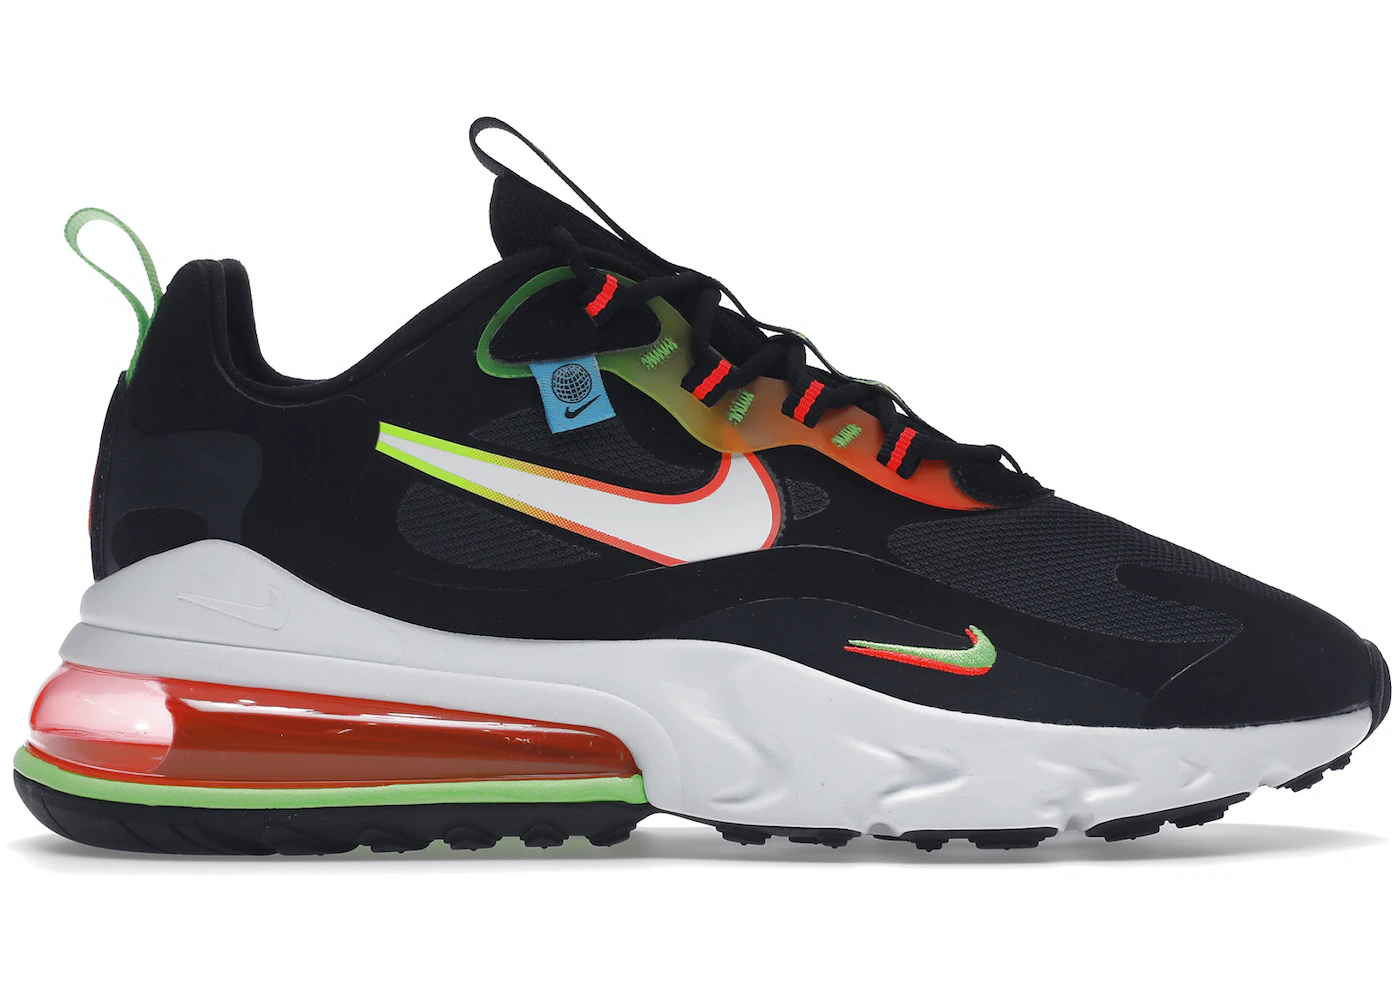 Official Images: Nike Air Max 270 React White Iridescent